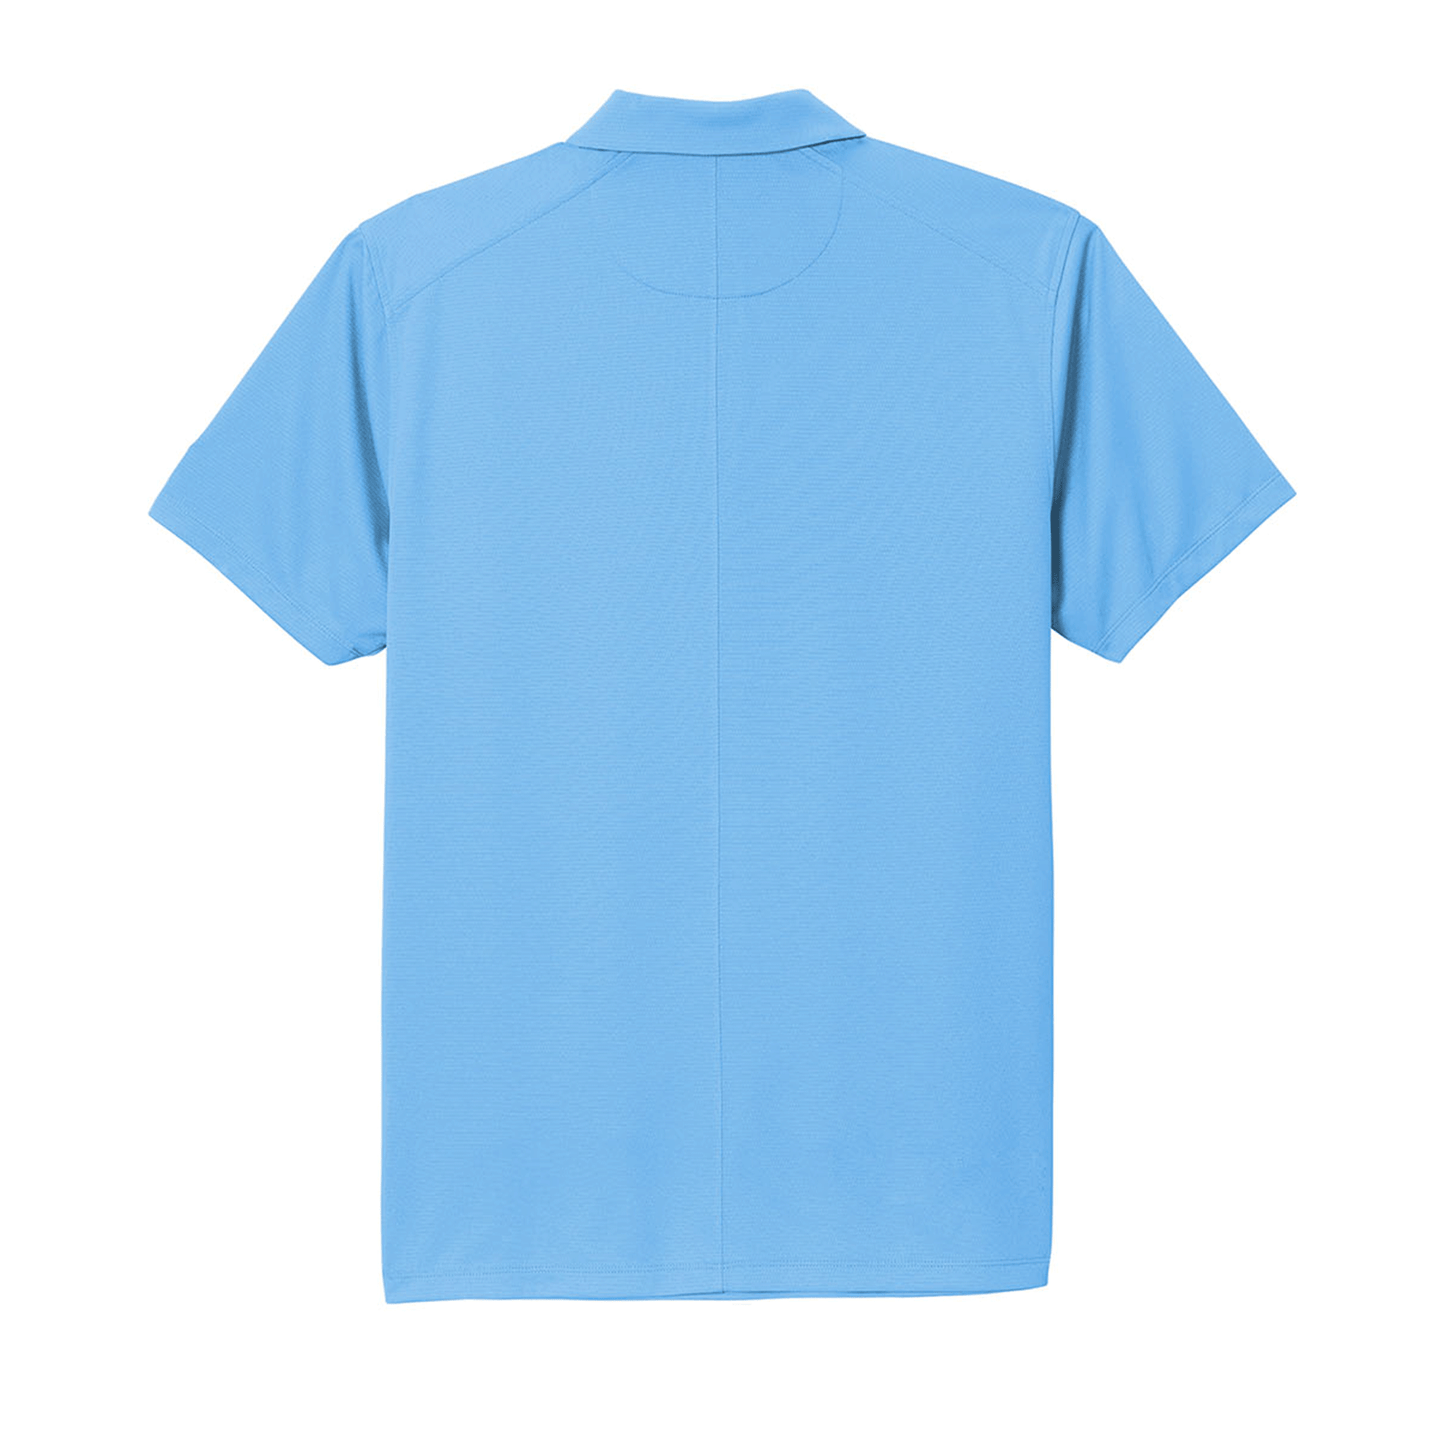 Nike Men's | Dry Essential Solid Polo